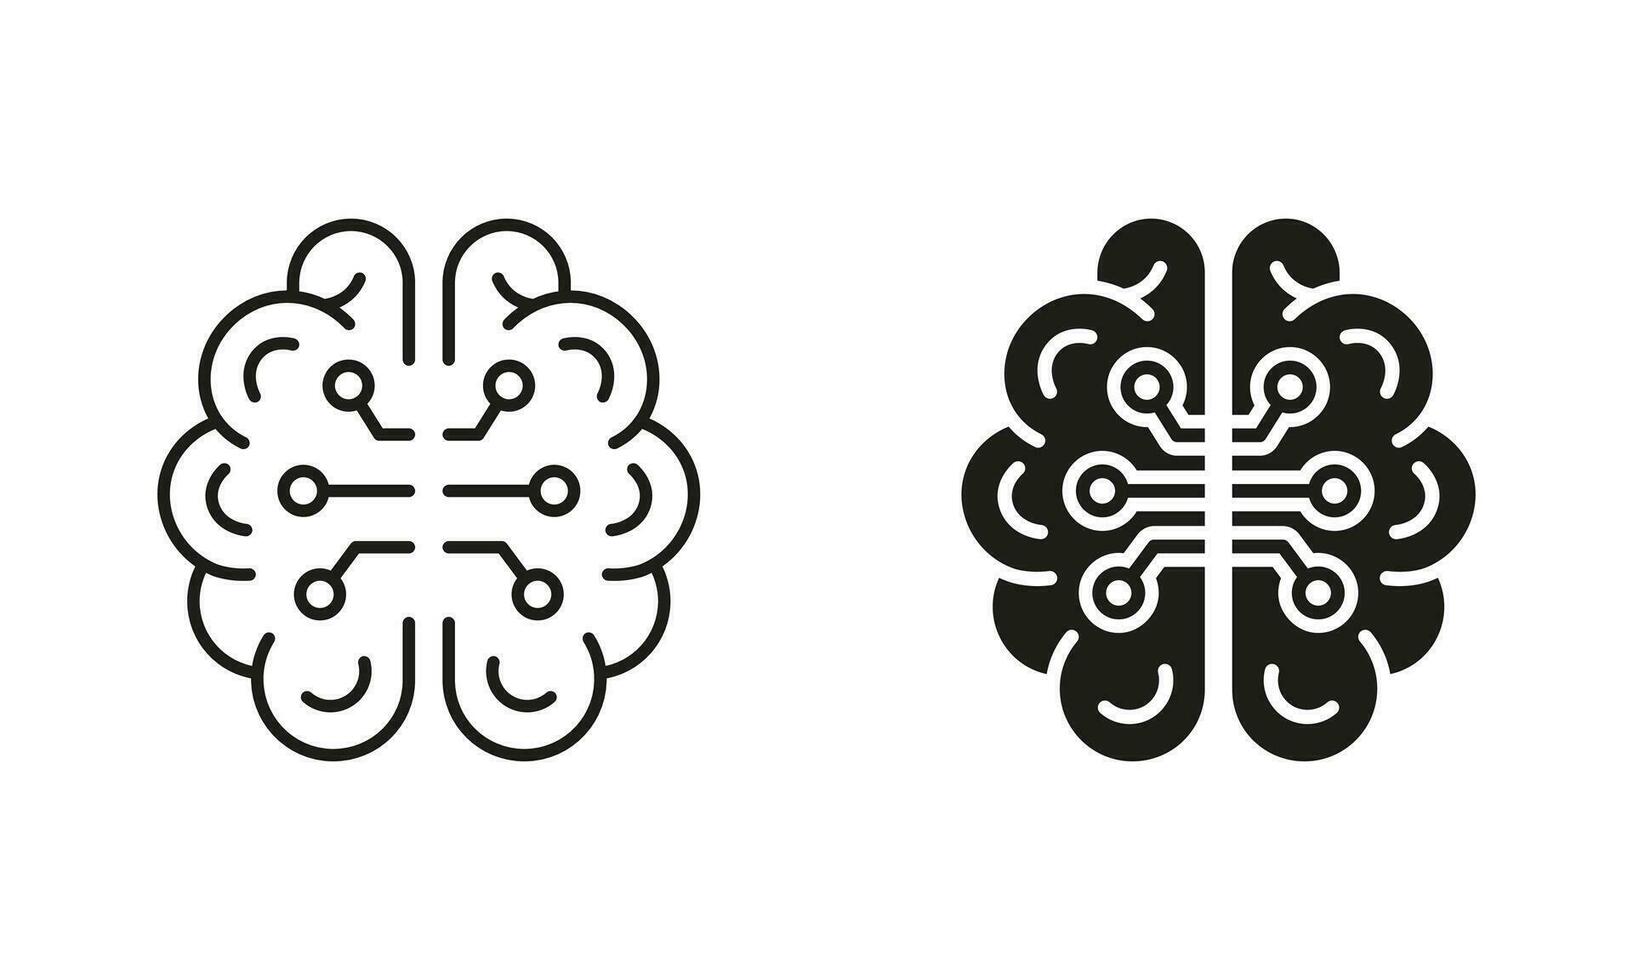 Human Brain with Circuit, Digital Technology Concept Silhouette and Line Icons Set. Artificial Intelligence Black Symbol Collection. Network, Tech Science Pictogram. Isolated Vector Illustration.